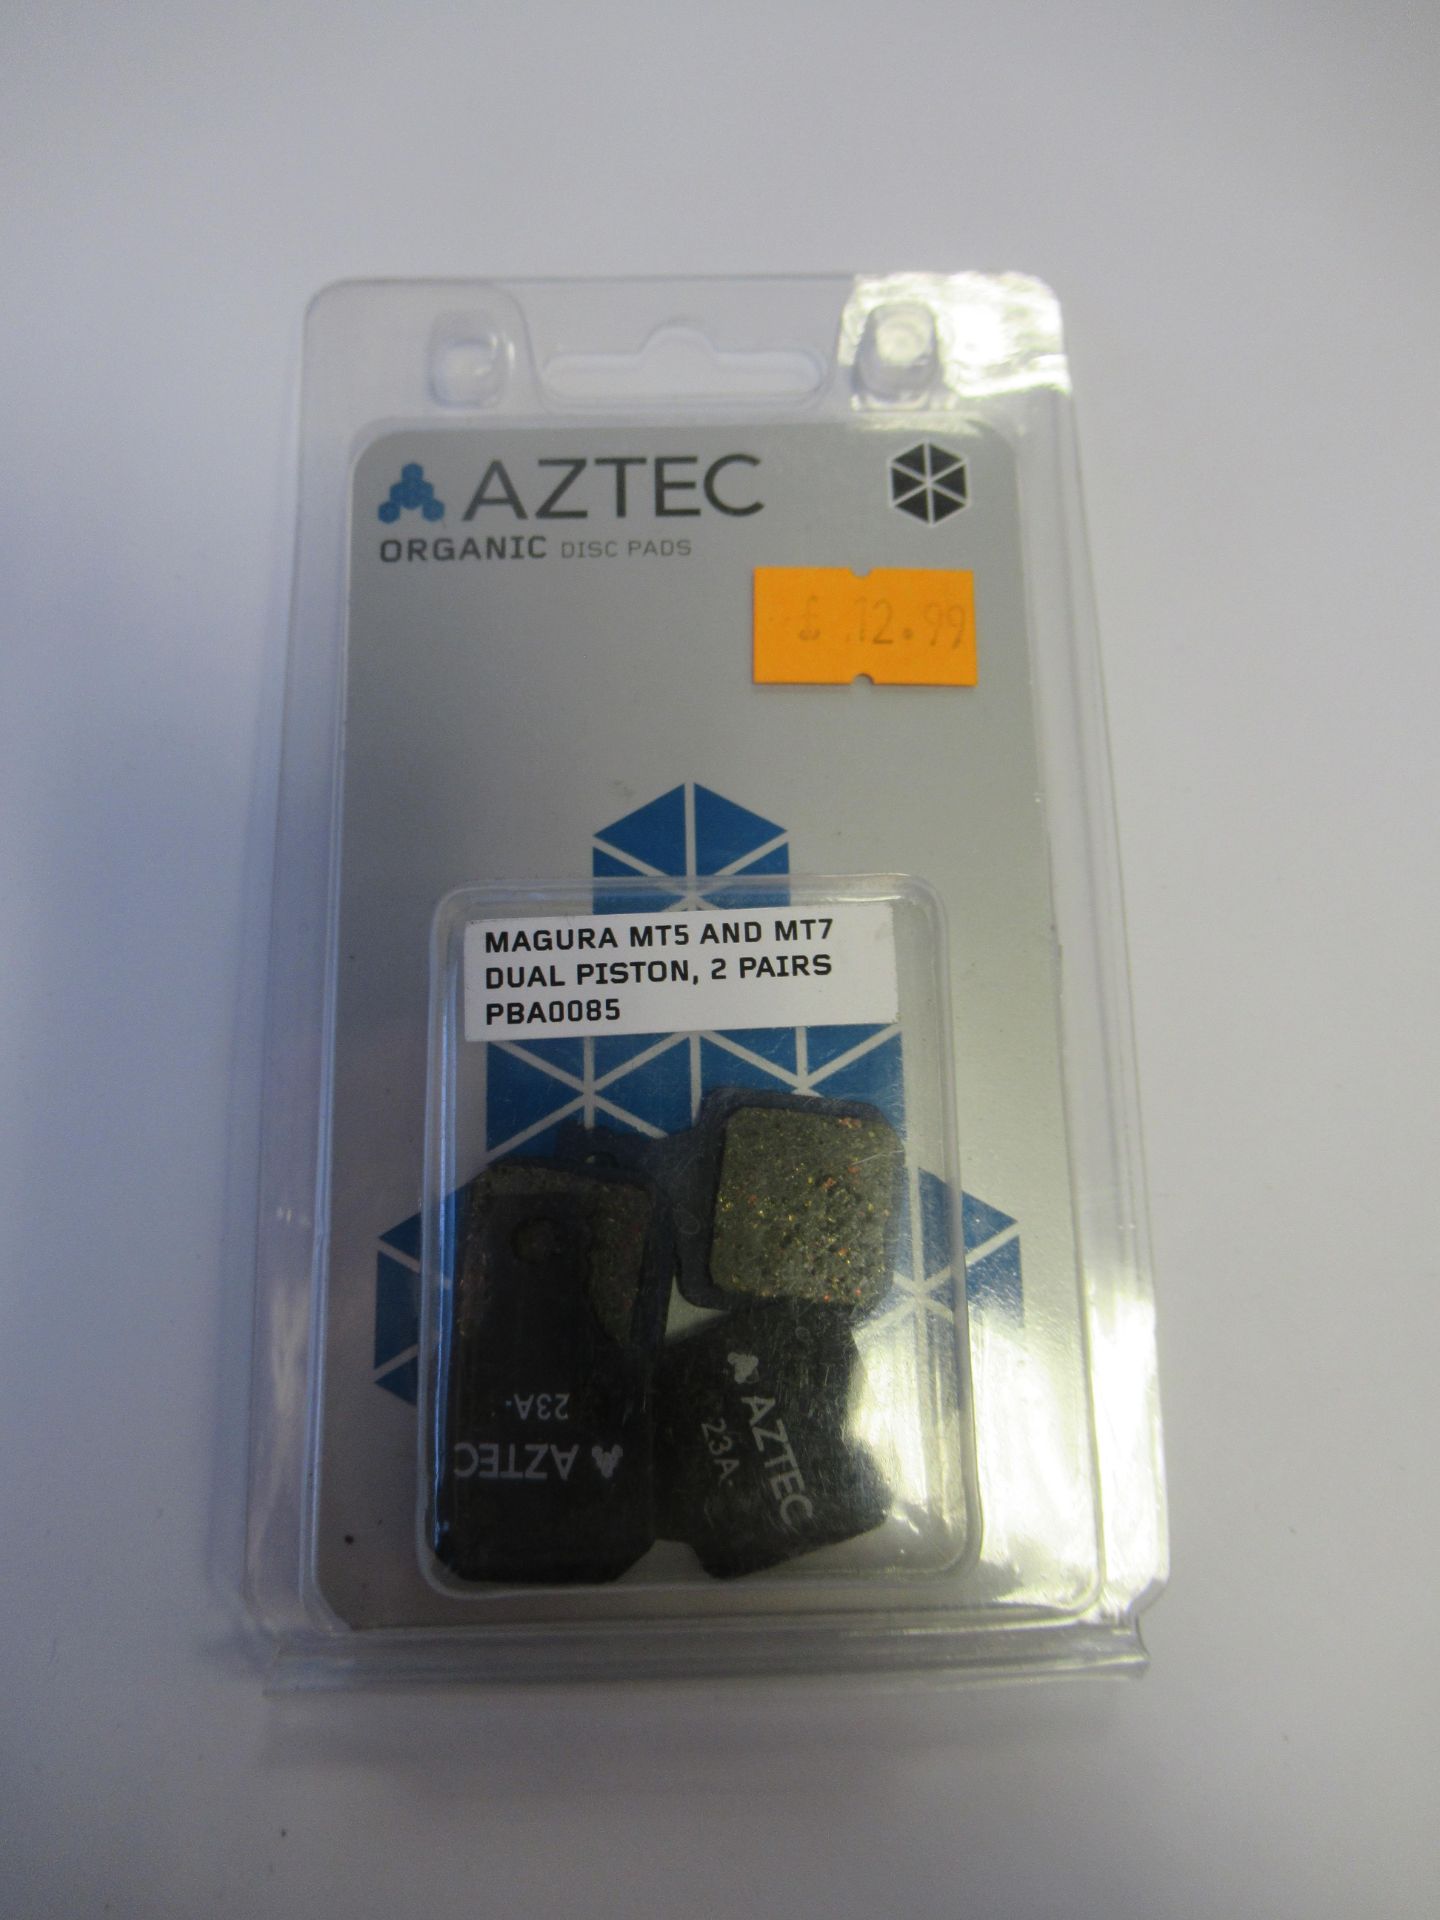 Aztec Sintered Disc Pads, (2x for Magura MT5 and MT7 Dual Piston, 2 pairs; 1x for Shimano Saint M810 - Image 20 of 21